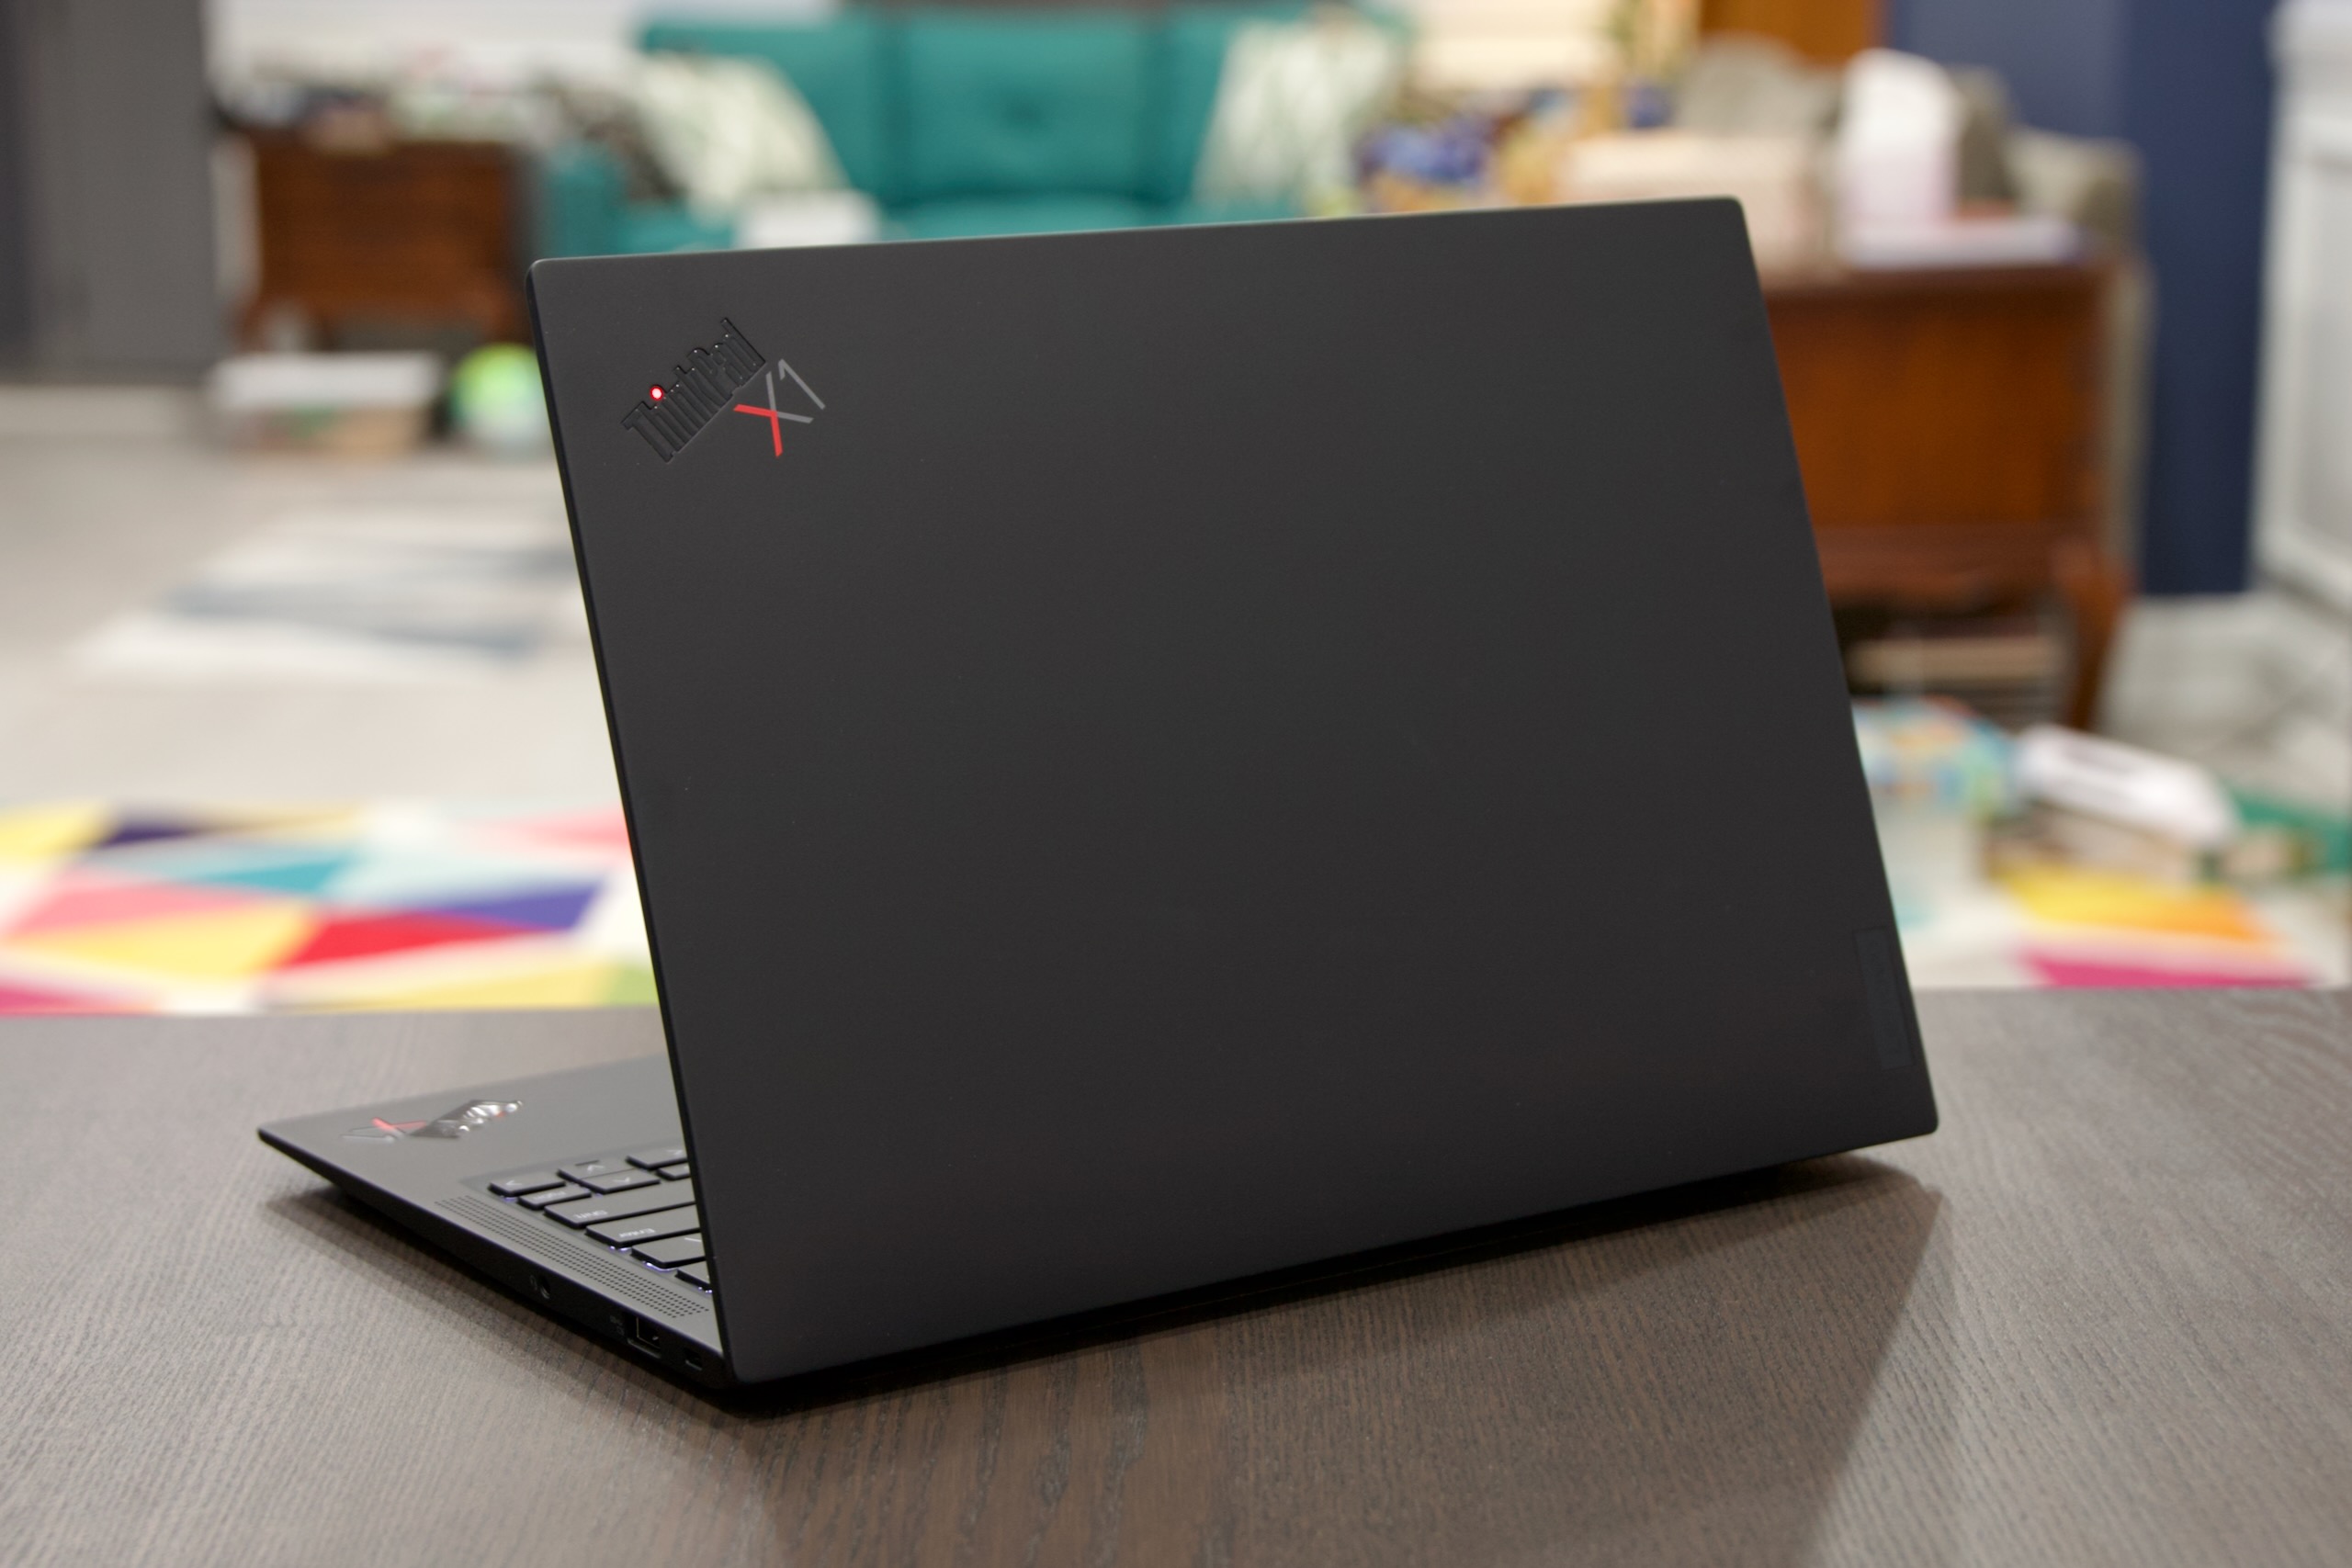 The ThinkPad X1 Carbon is another in a long line of understated black business laptops. 